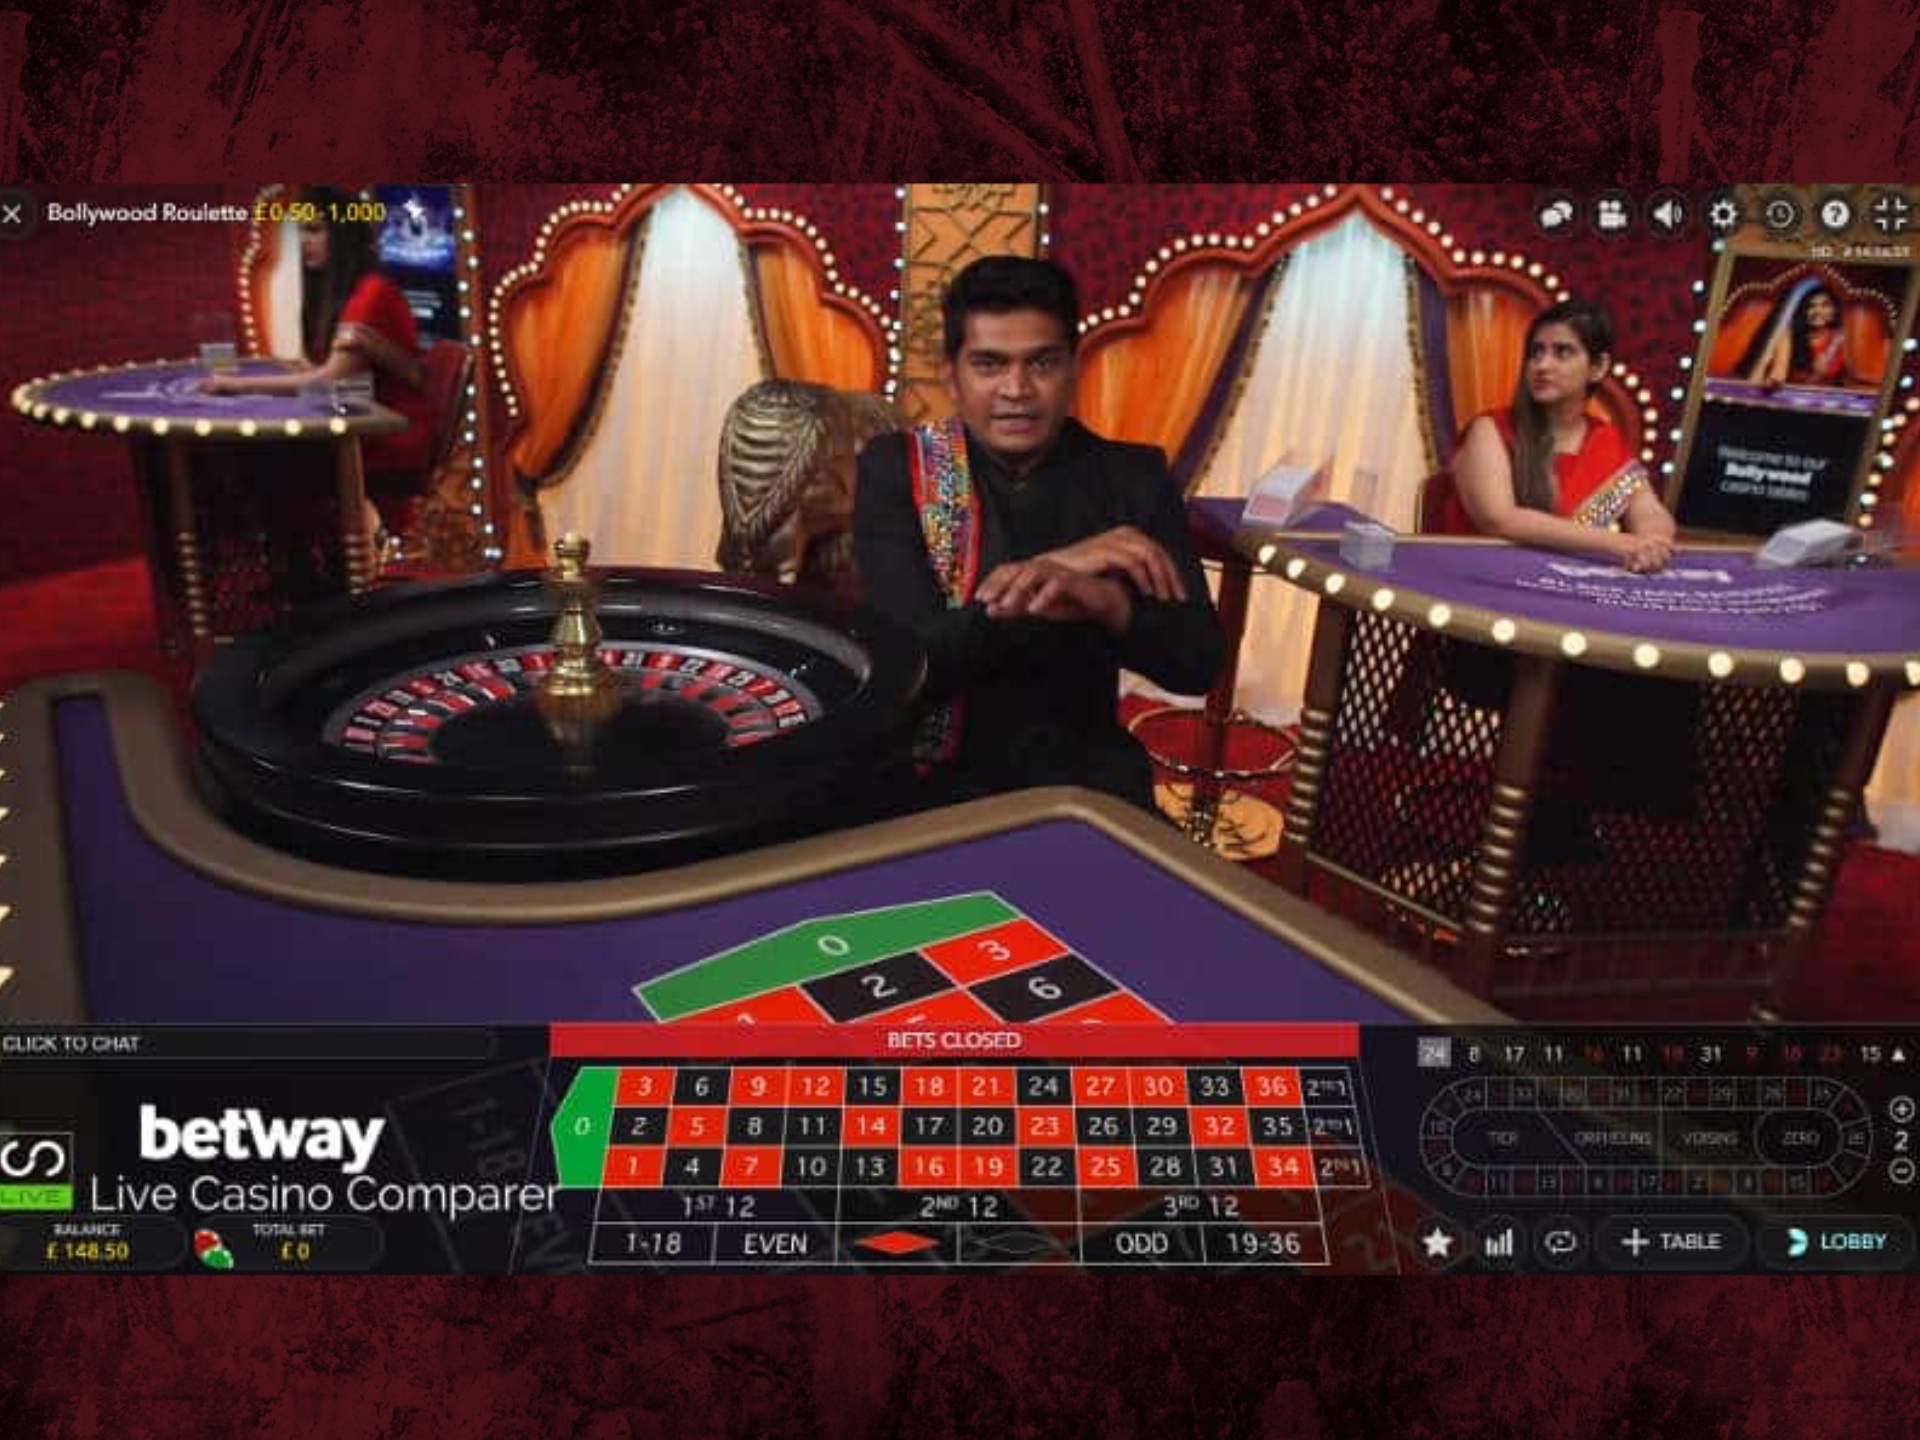 Sign up for an online casino and play casino games with live dealers.